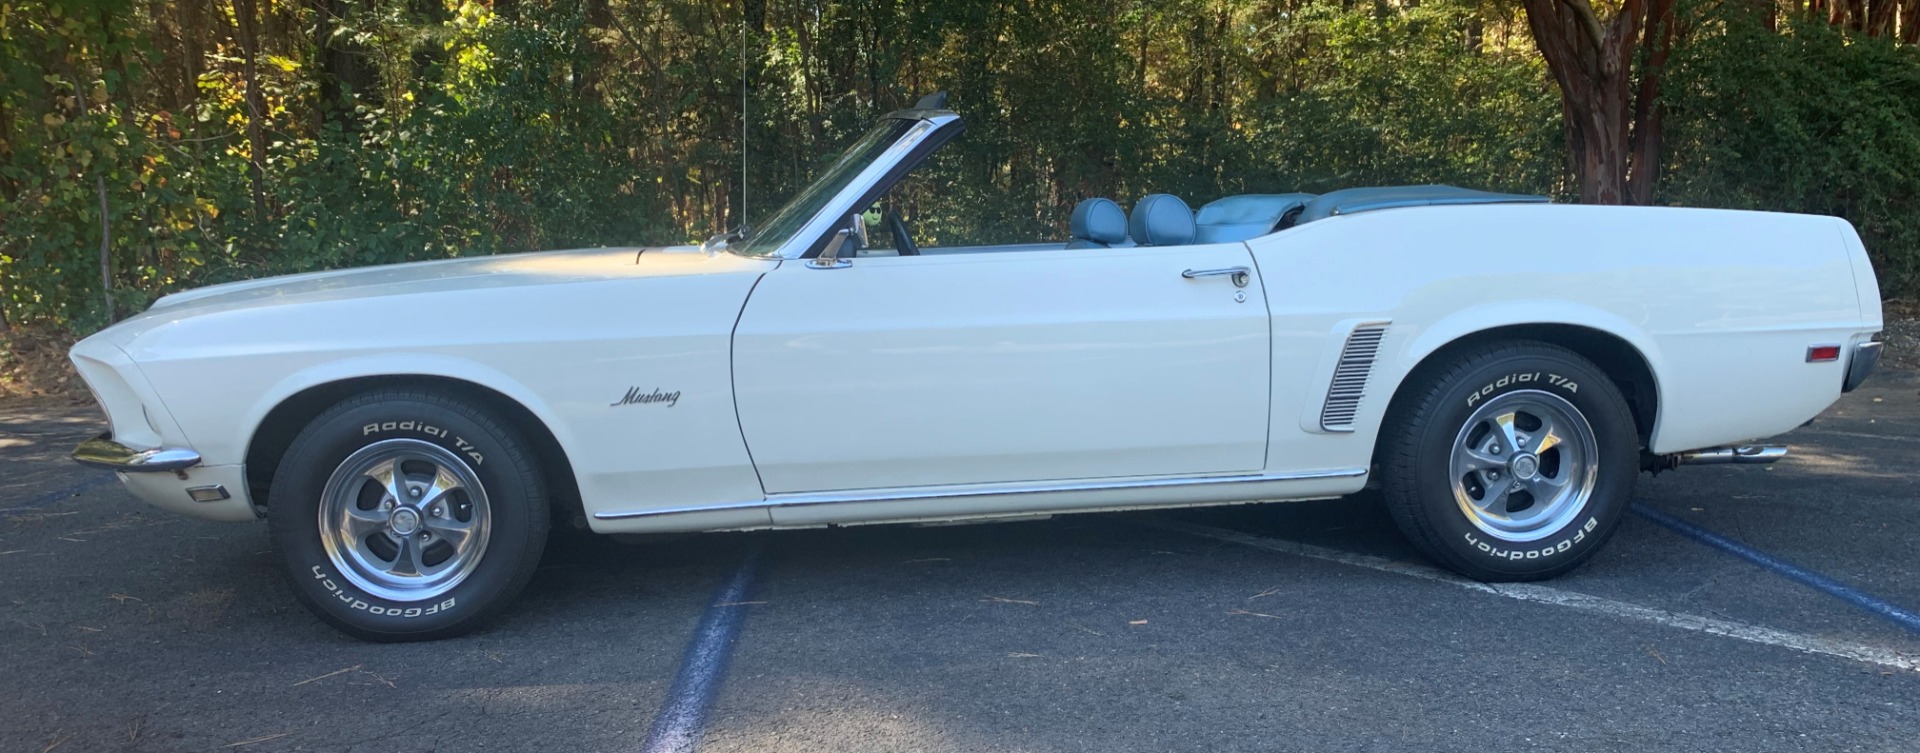 Used 1969 Ford Mustang Convertible